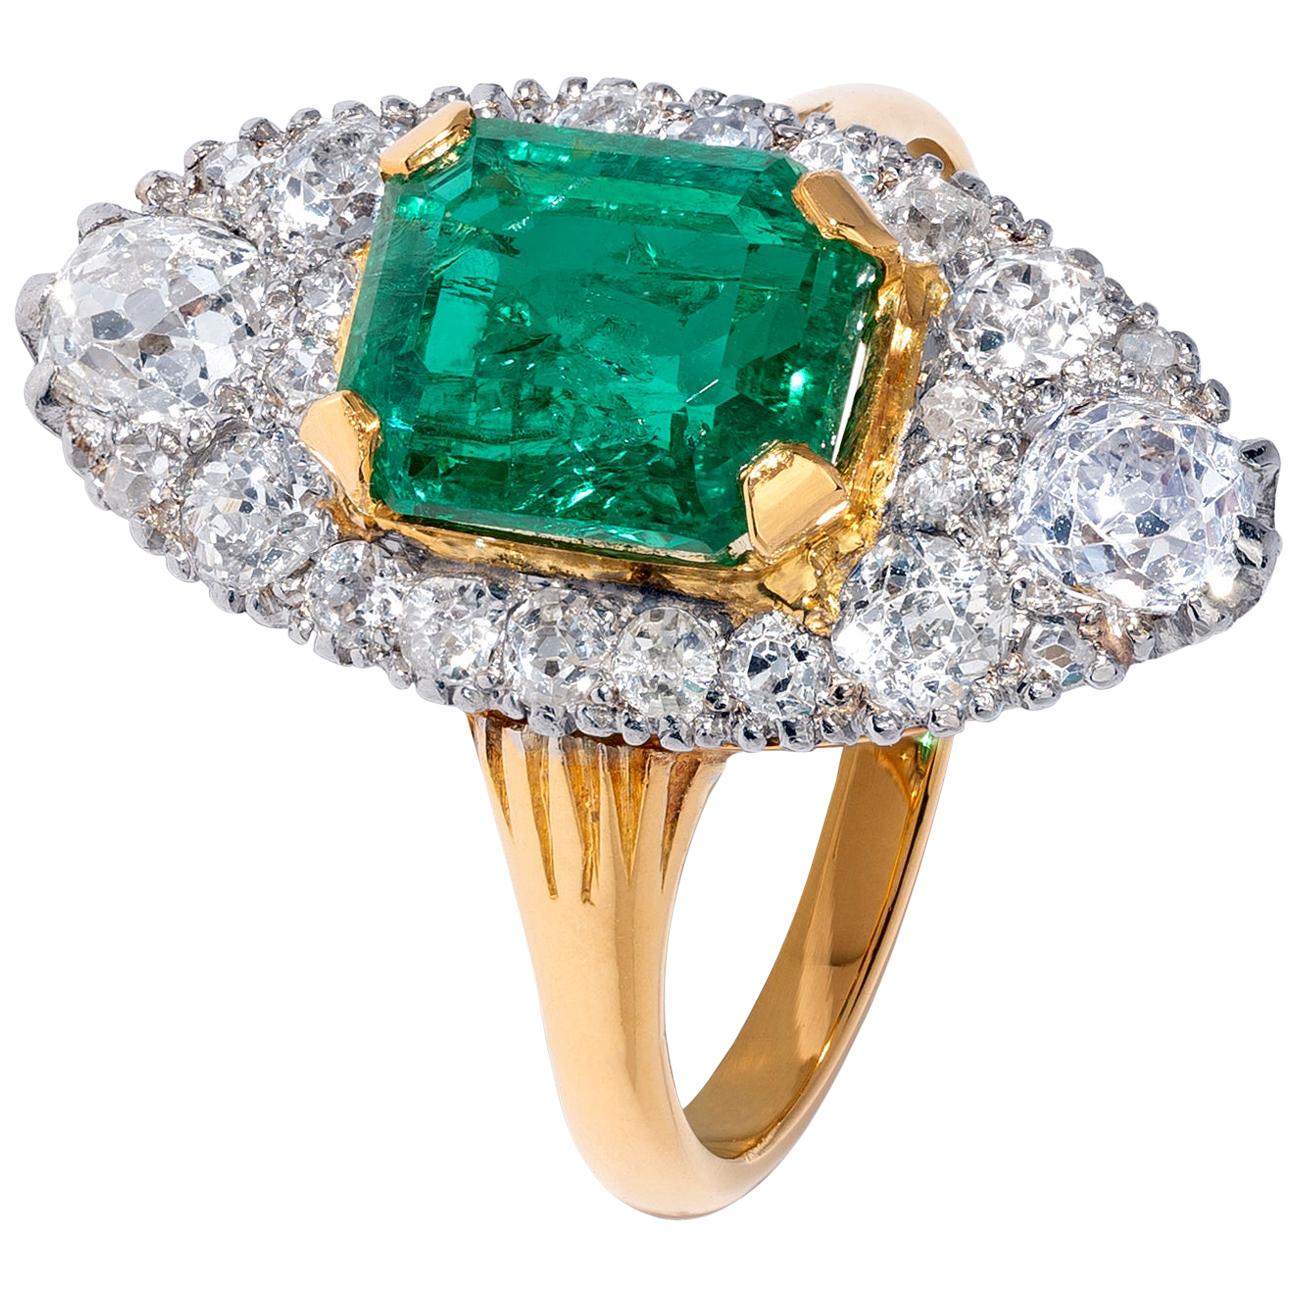 Unique Yellow Gold 2.49 Carat Emerald Ring with White Diamonds For Sale